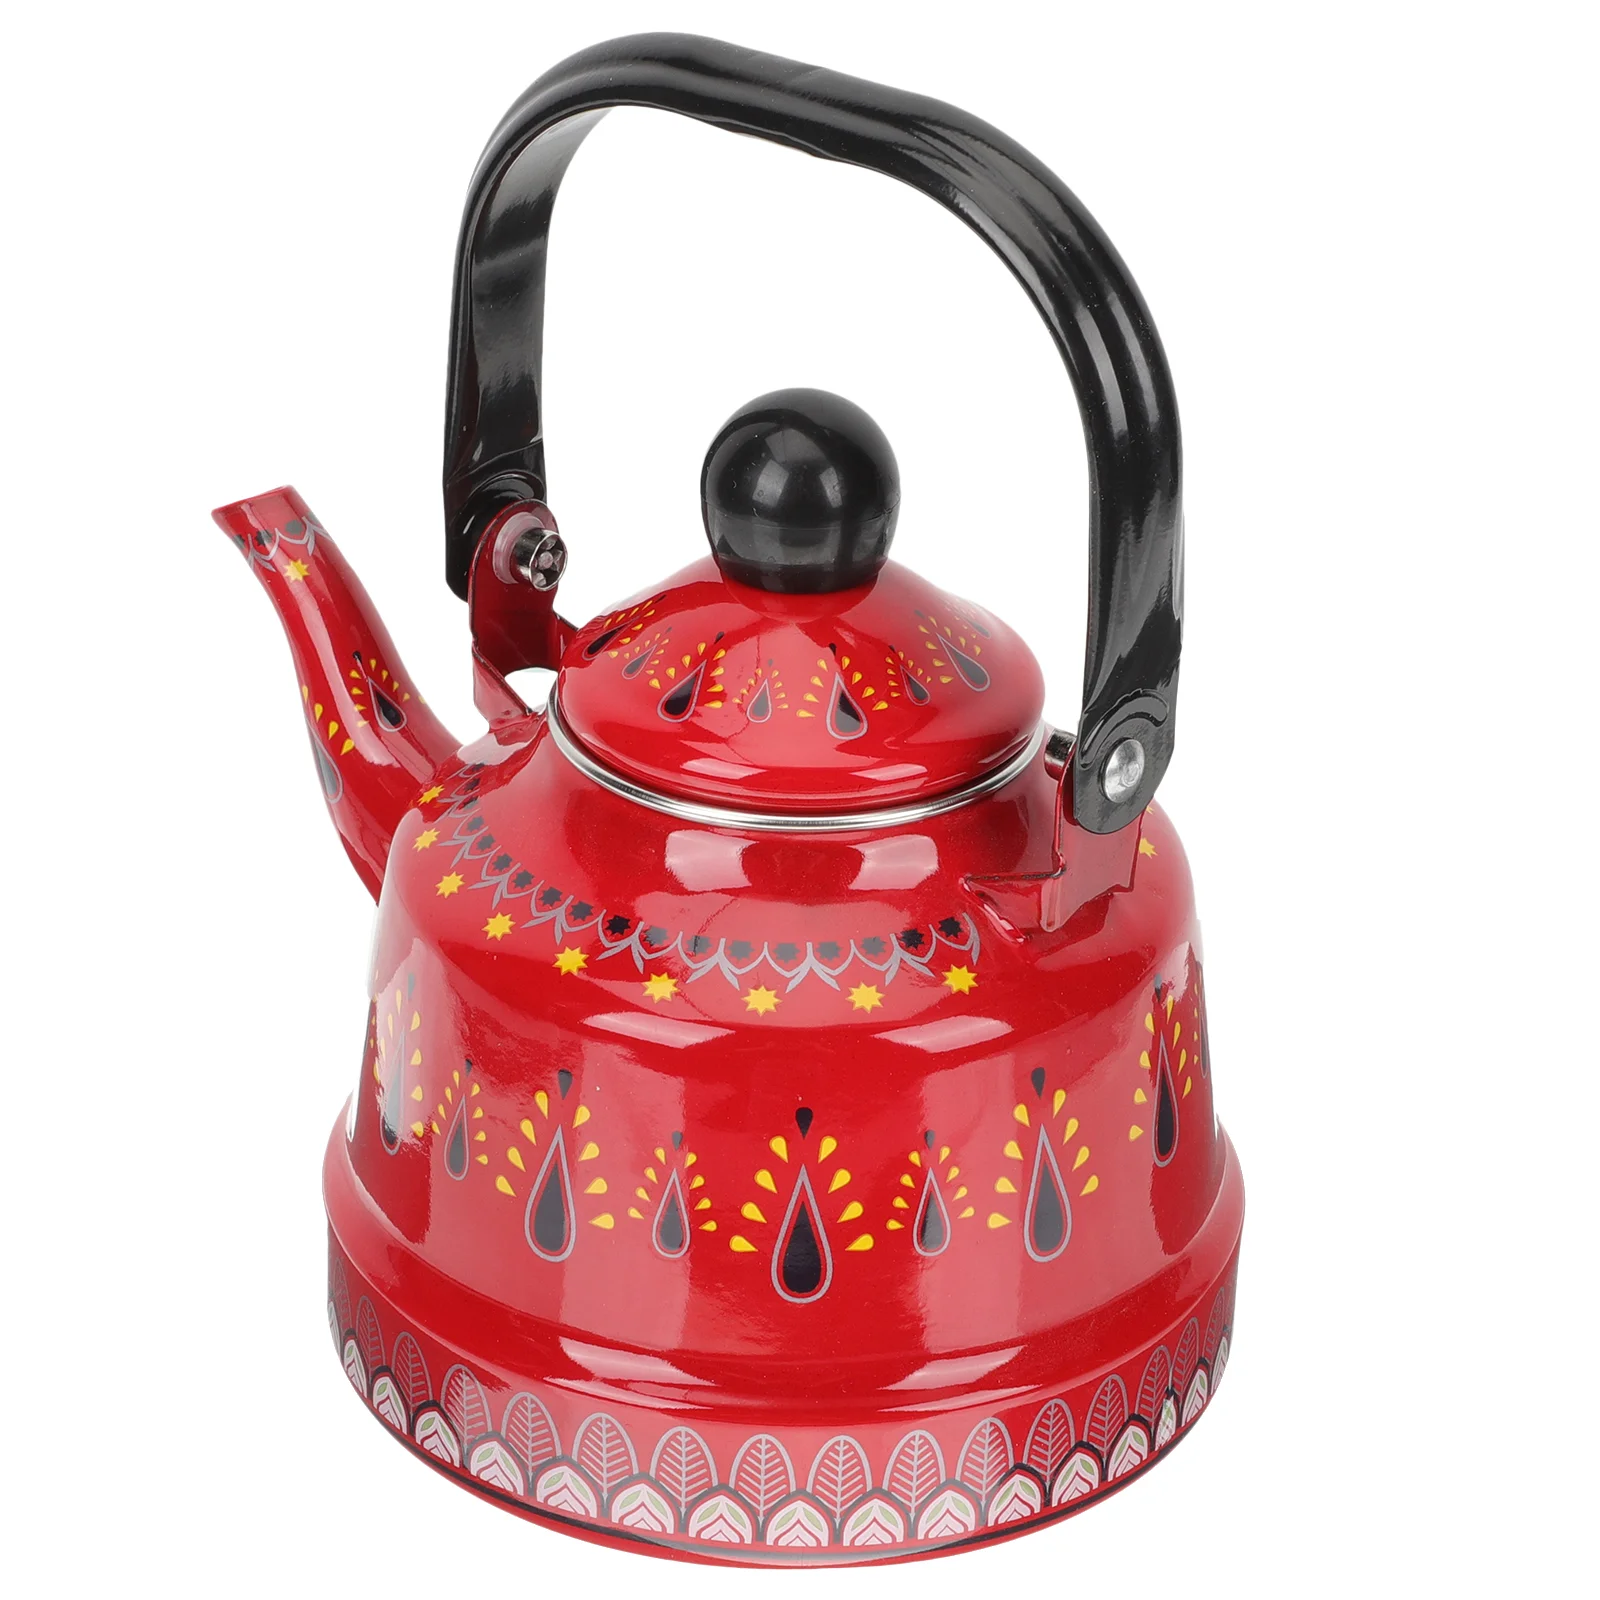 

Kettle Tea Teapot Water Pot Stovetop Enamel Office The Stove Coffee Merchandise Whistling Teakettle Ceramic Camping Boiling